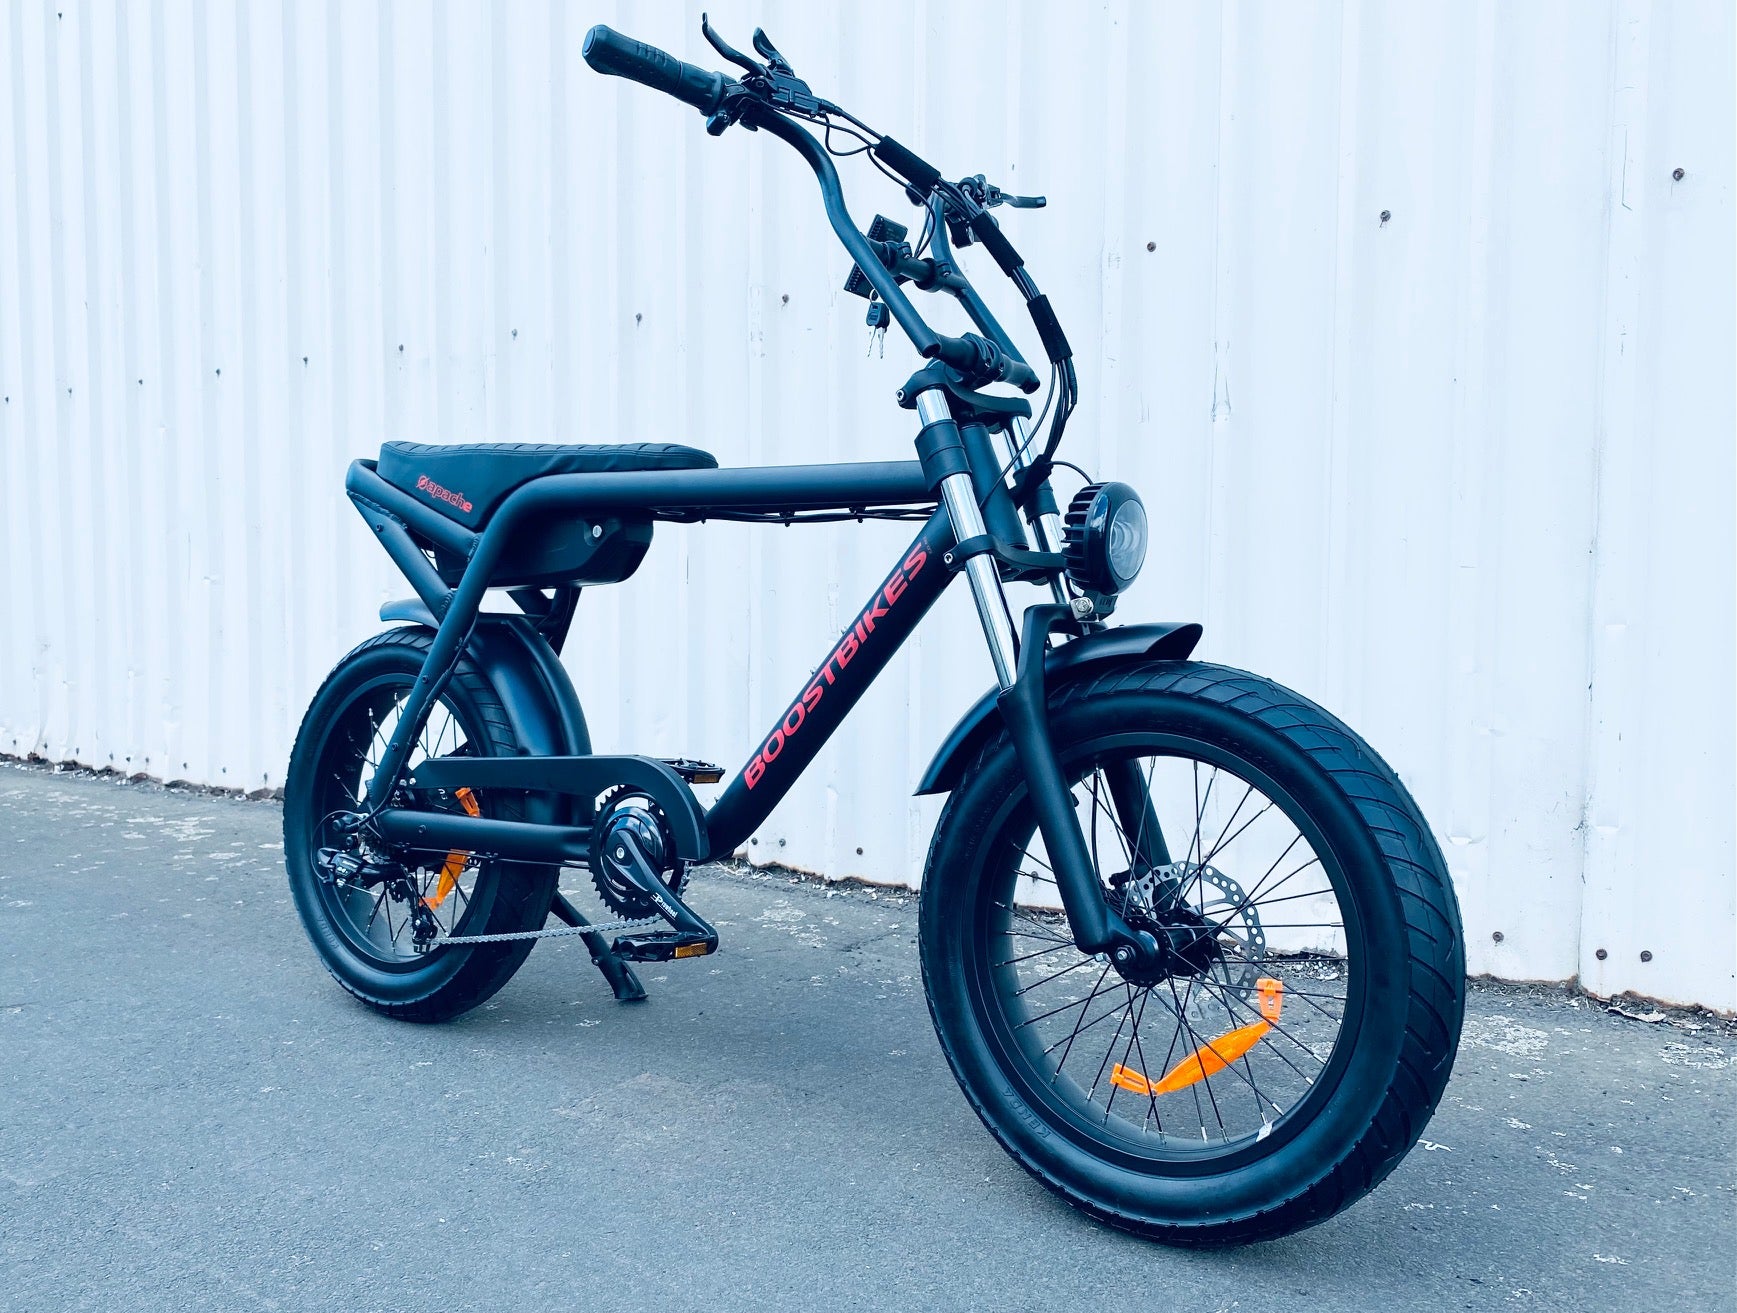  Apache Electric Bike from Boostbikes. Pedal assist or twist the throttle and go.